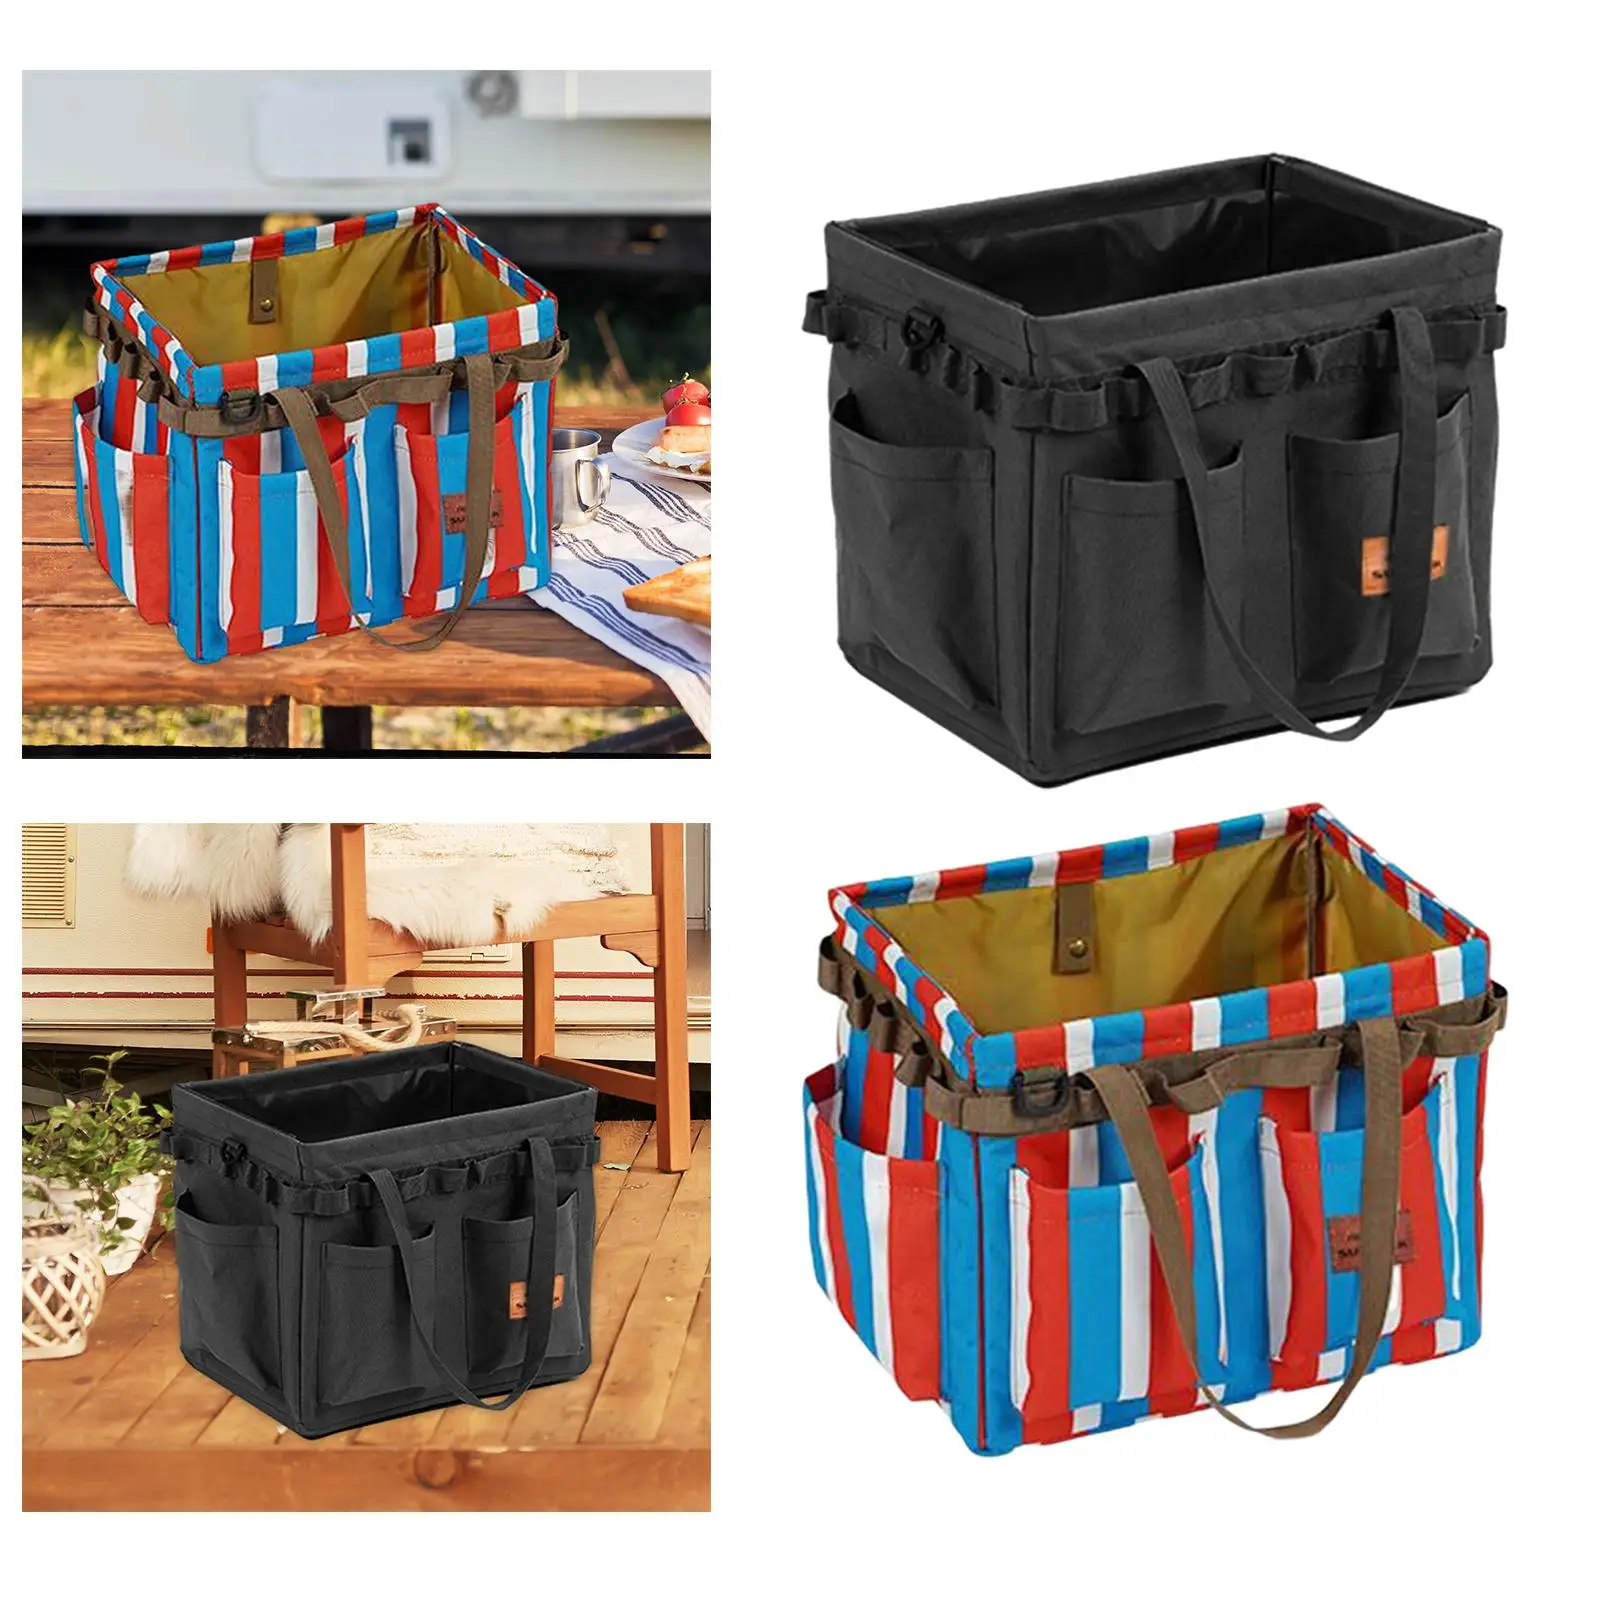 Foldable Tool Organizer with Pocket and Loop, Large Capacity Camping Bag for